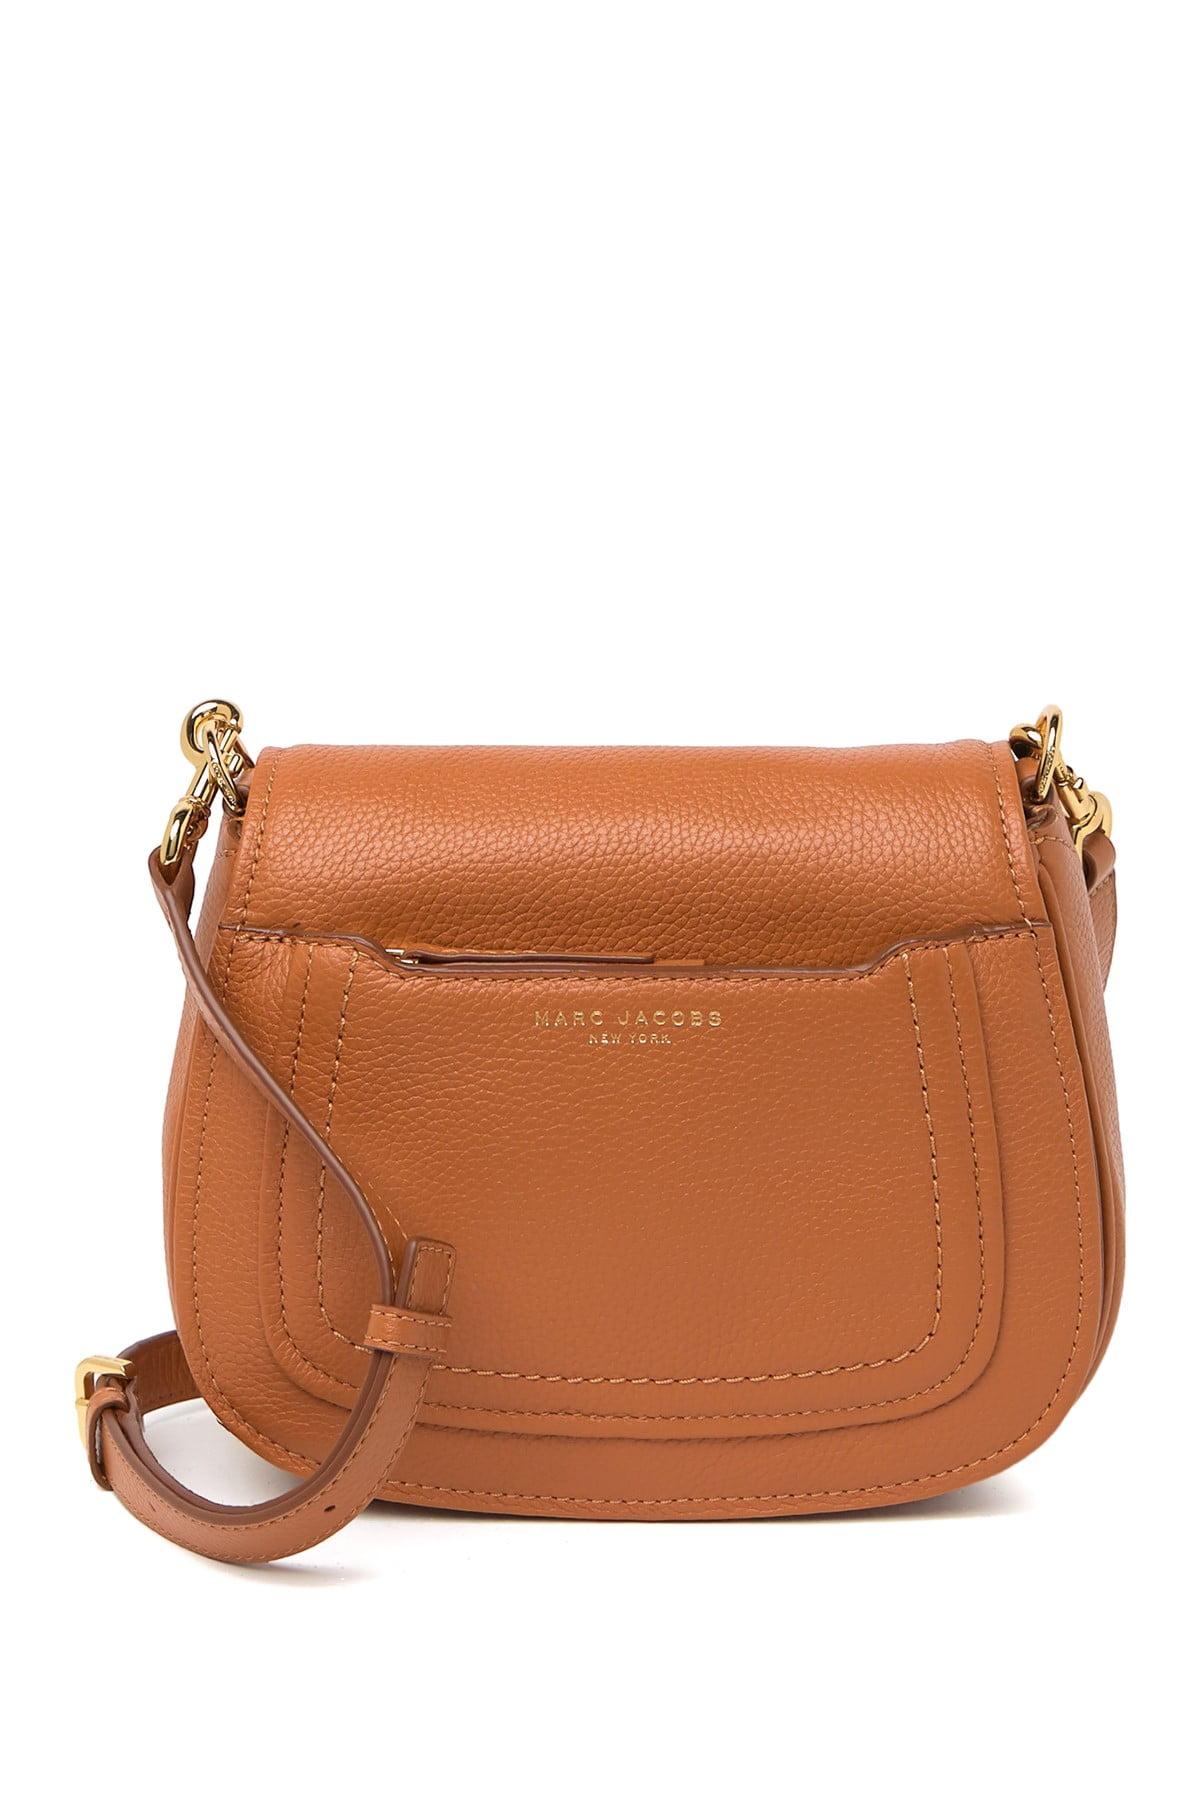 Marc Jacobs Empire City Mini Messenger Leather Crossbody Bag in